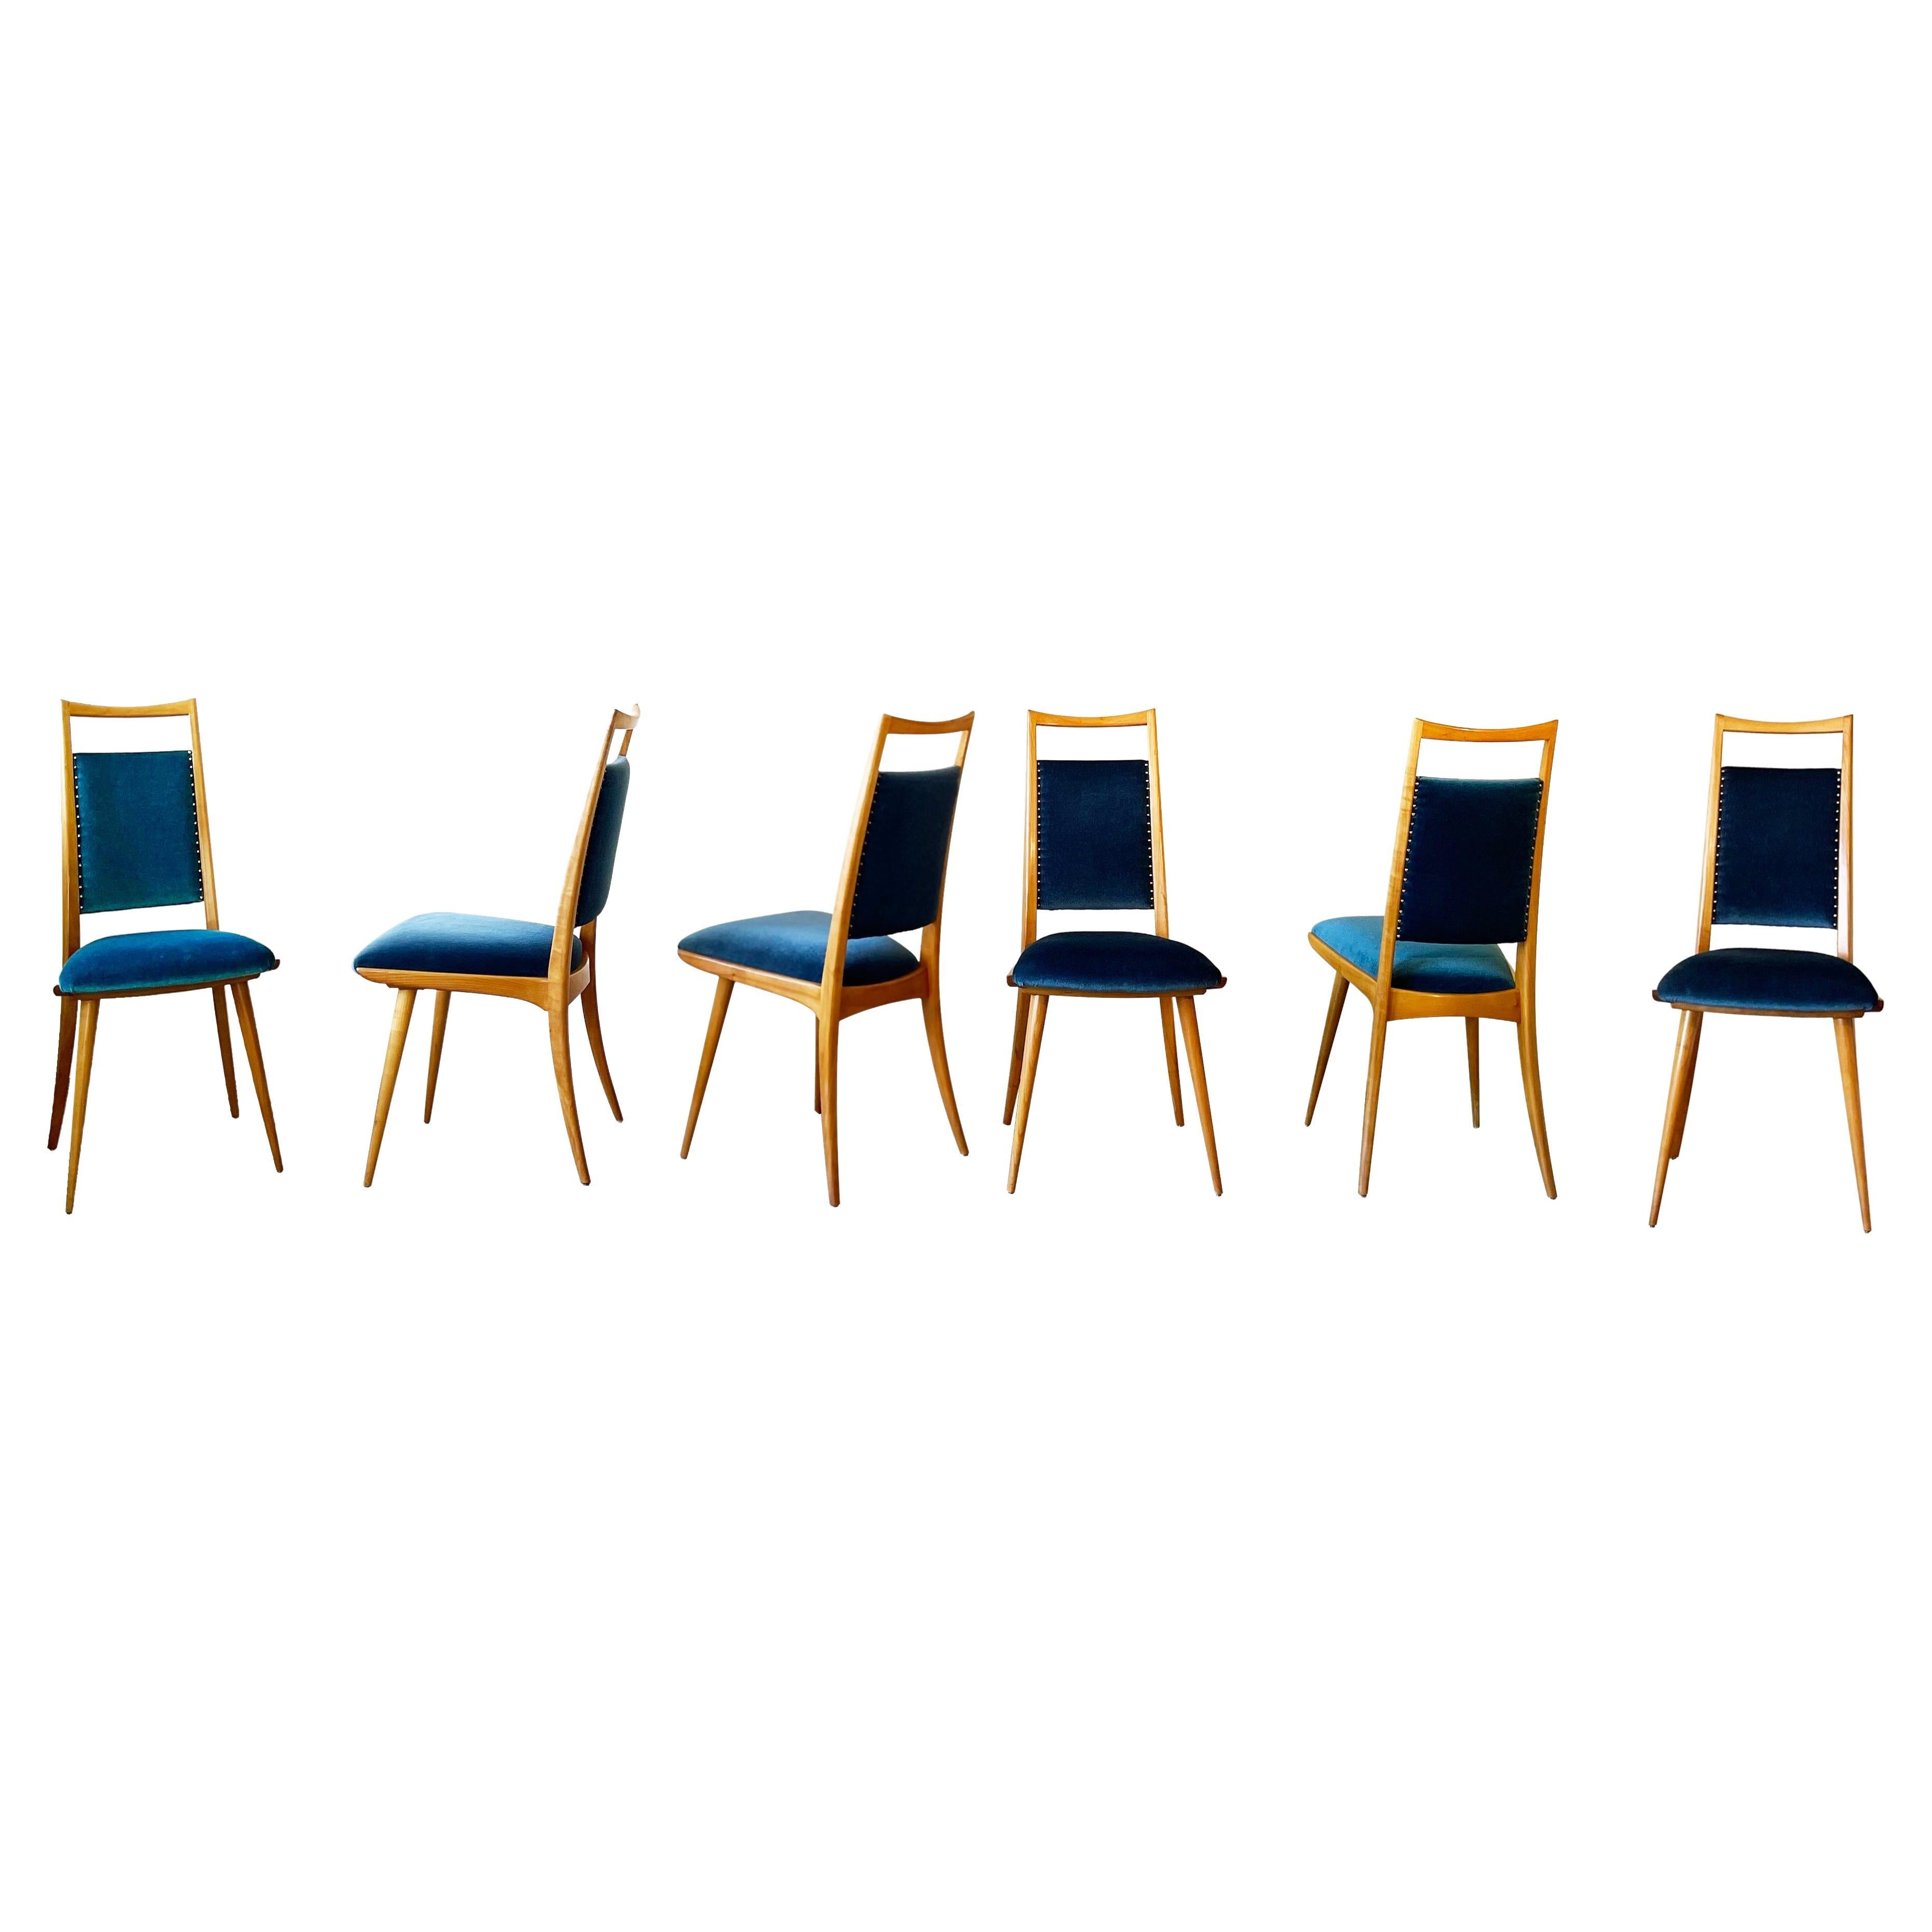 Set of 6 Mid Century Dining Chairs, Turquoise Velvet by Dettinger, Germany